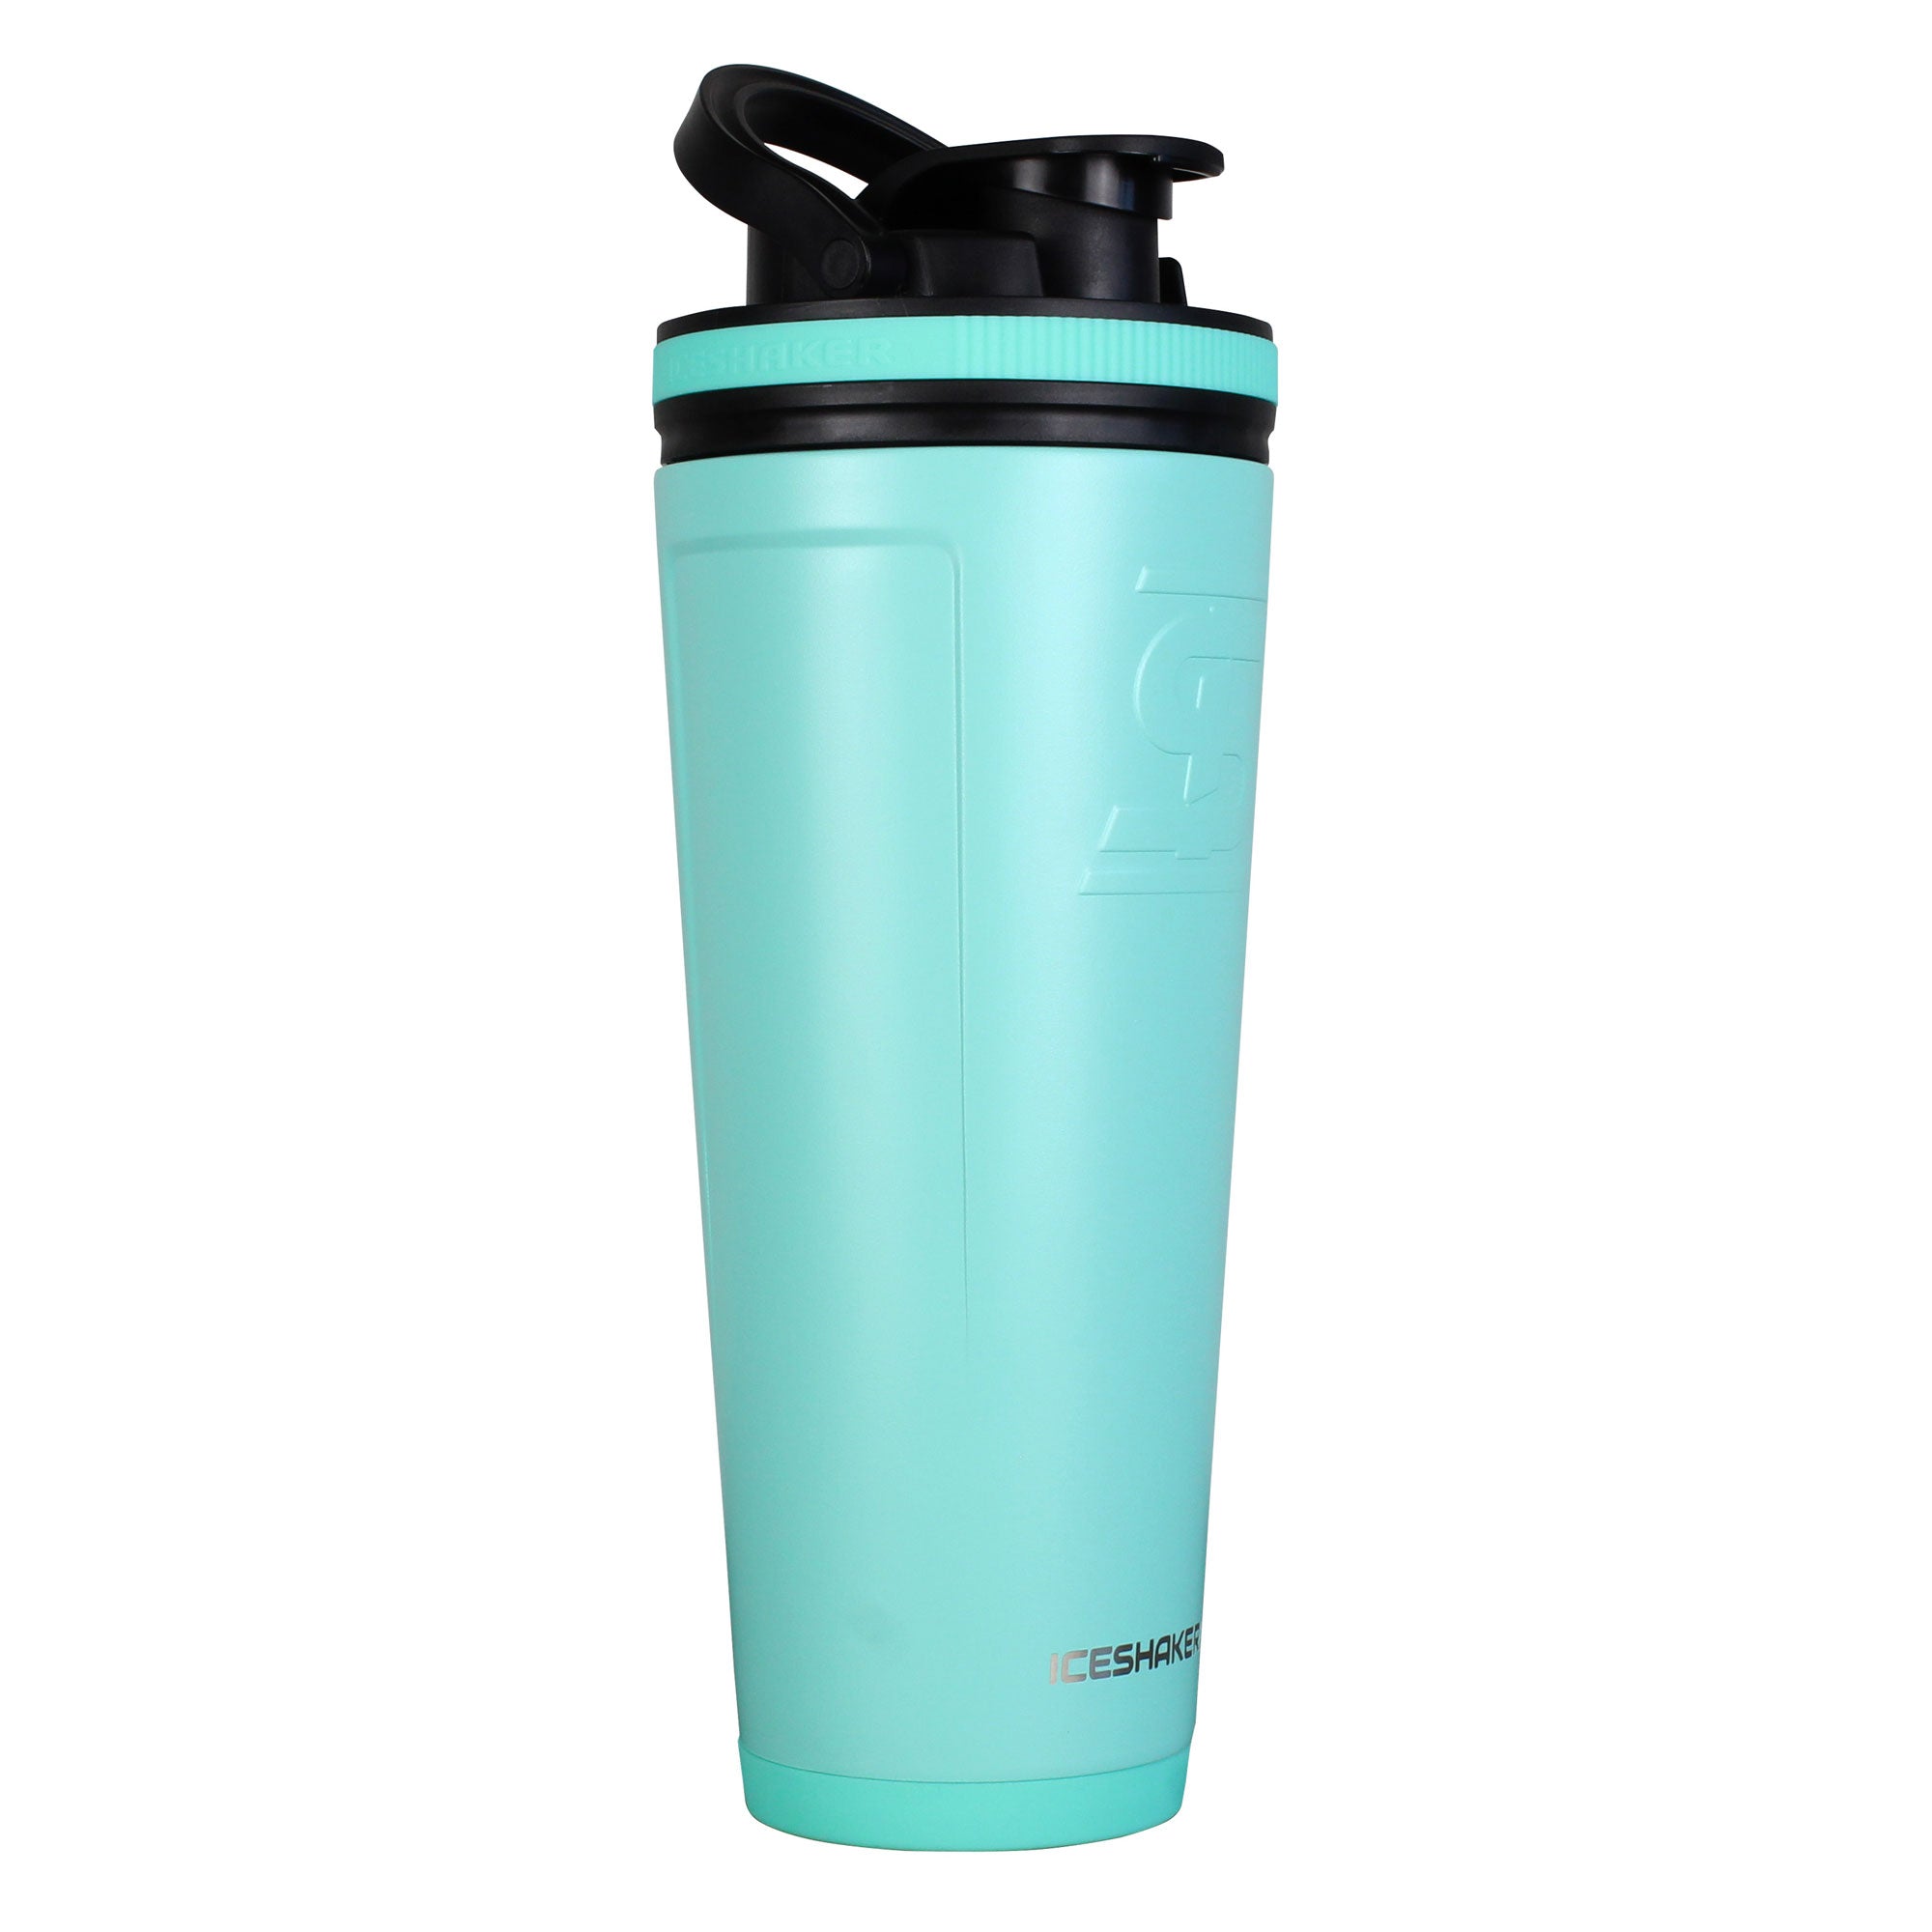 Ozizo M-63 Cyan 20oz 590 ml Insulated Protein Shaker with Small Mouth and  Spring